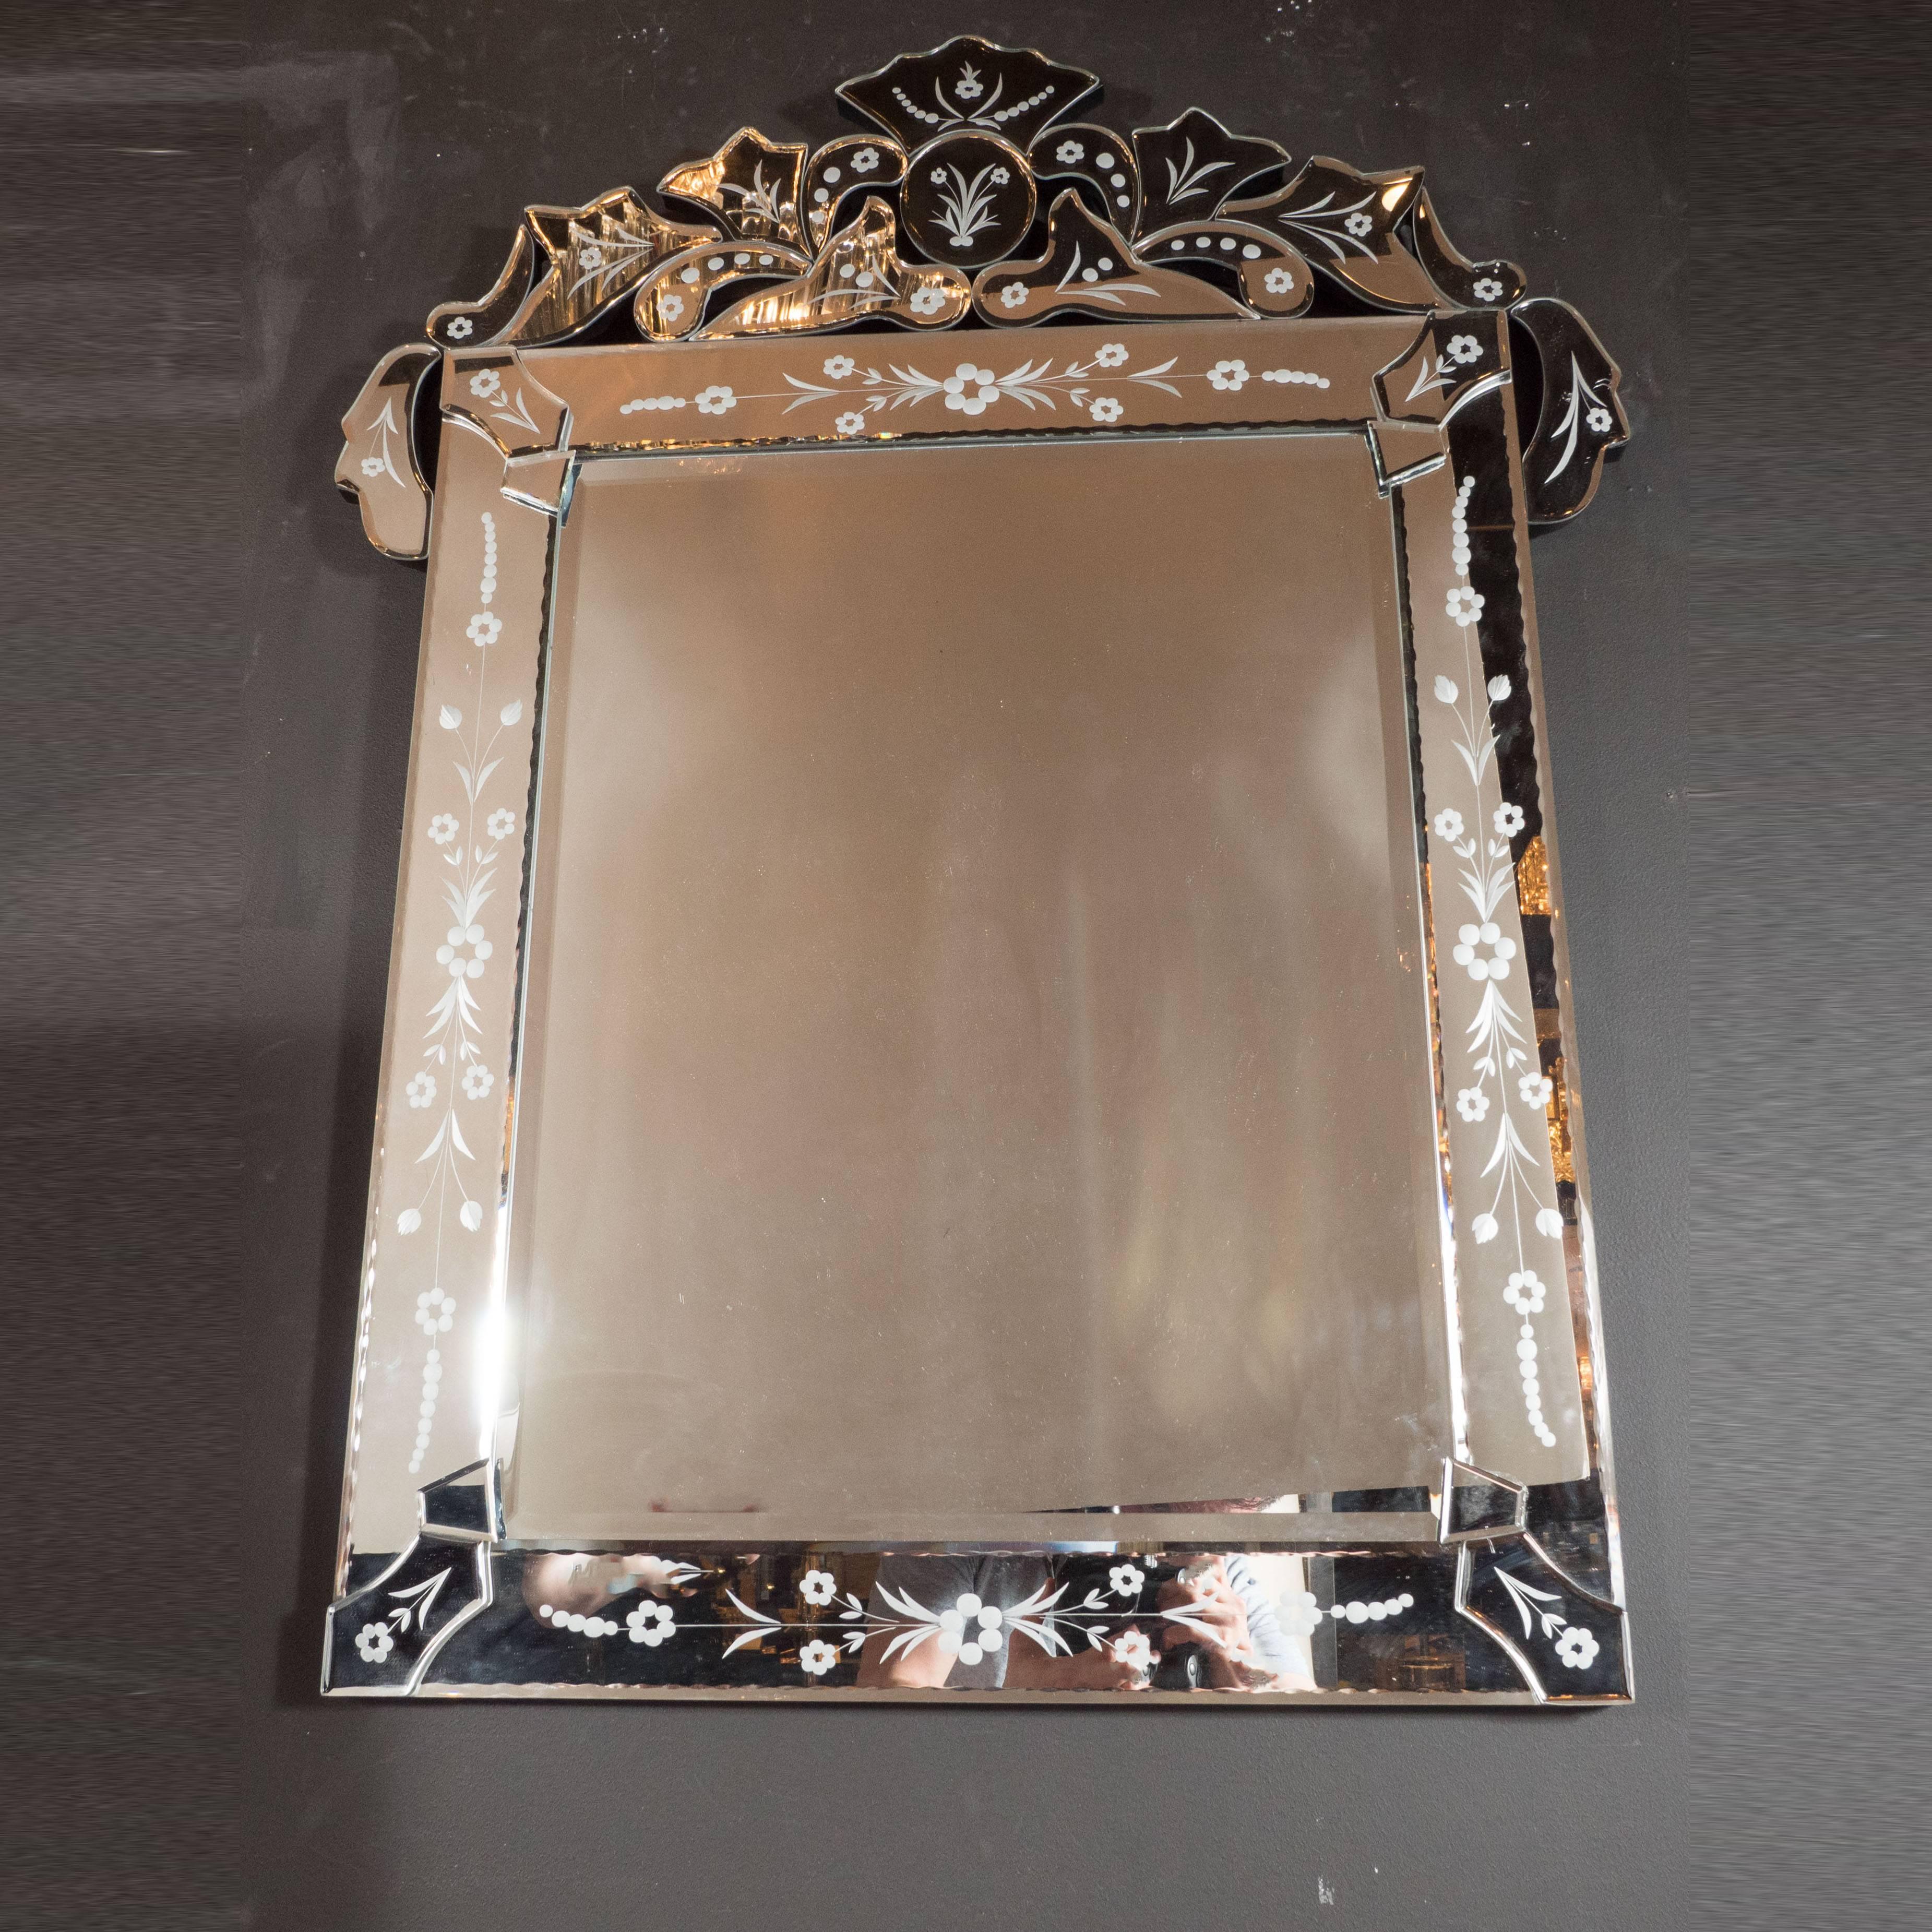 Italian 1940s Venetian Mirror with Bevel and Chain Detailing and Floral Motifs